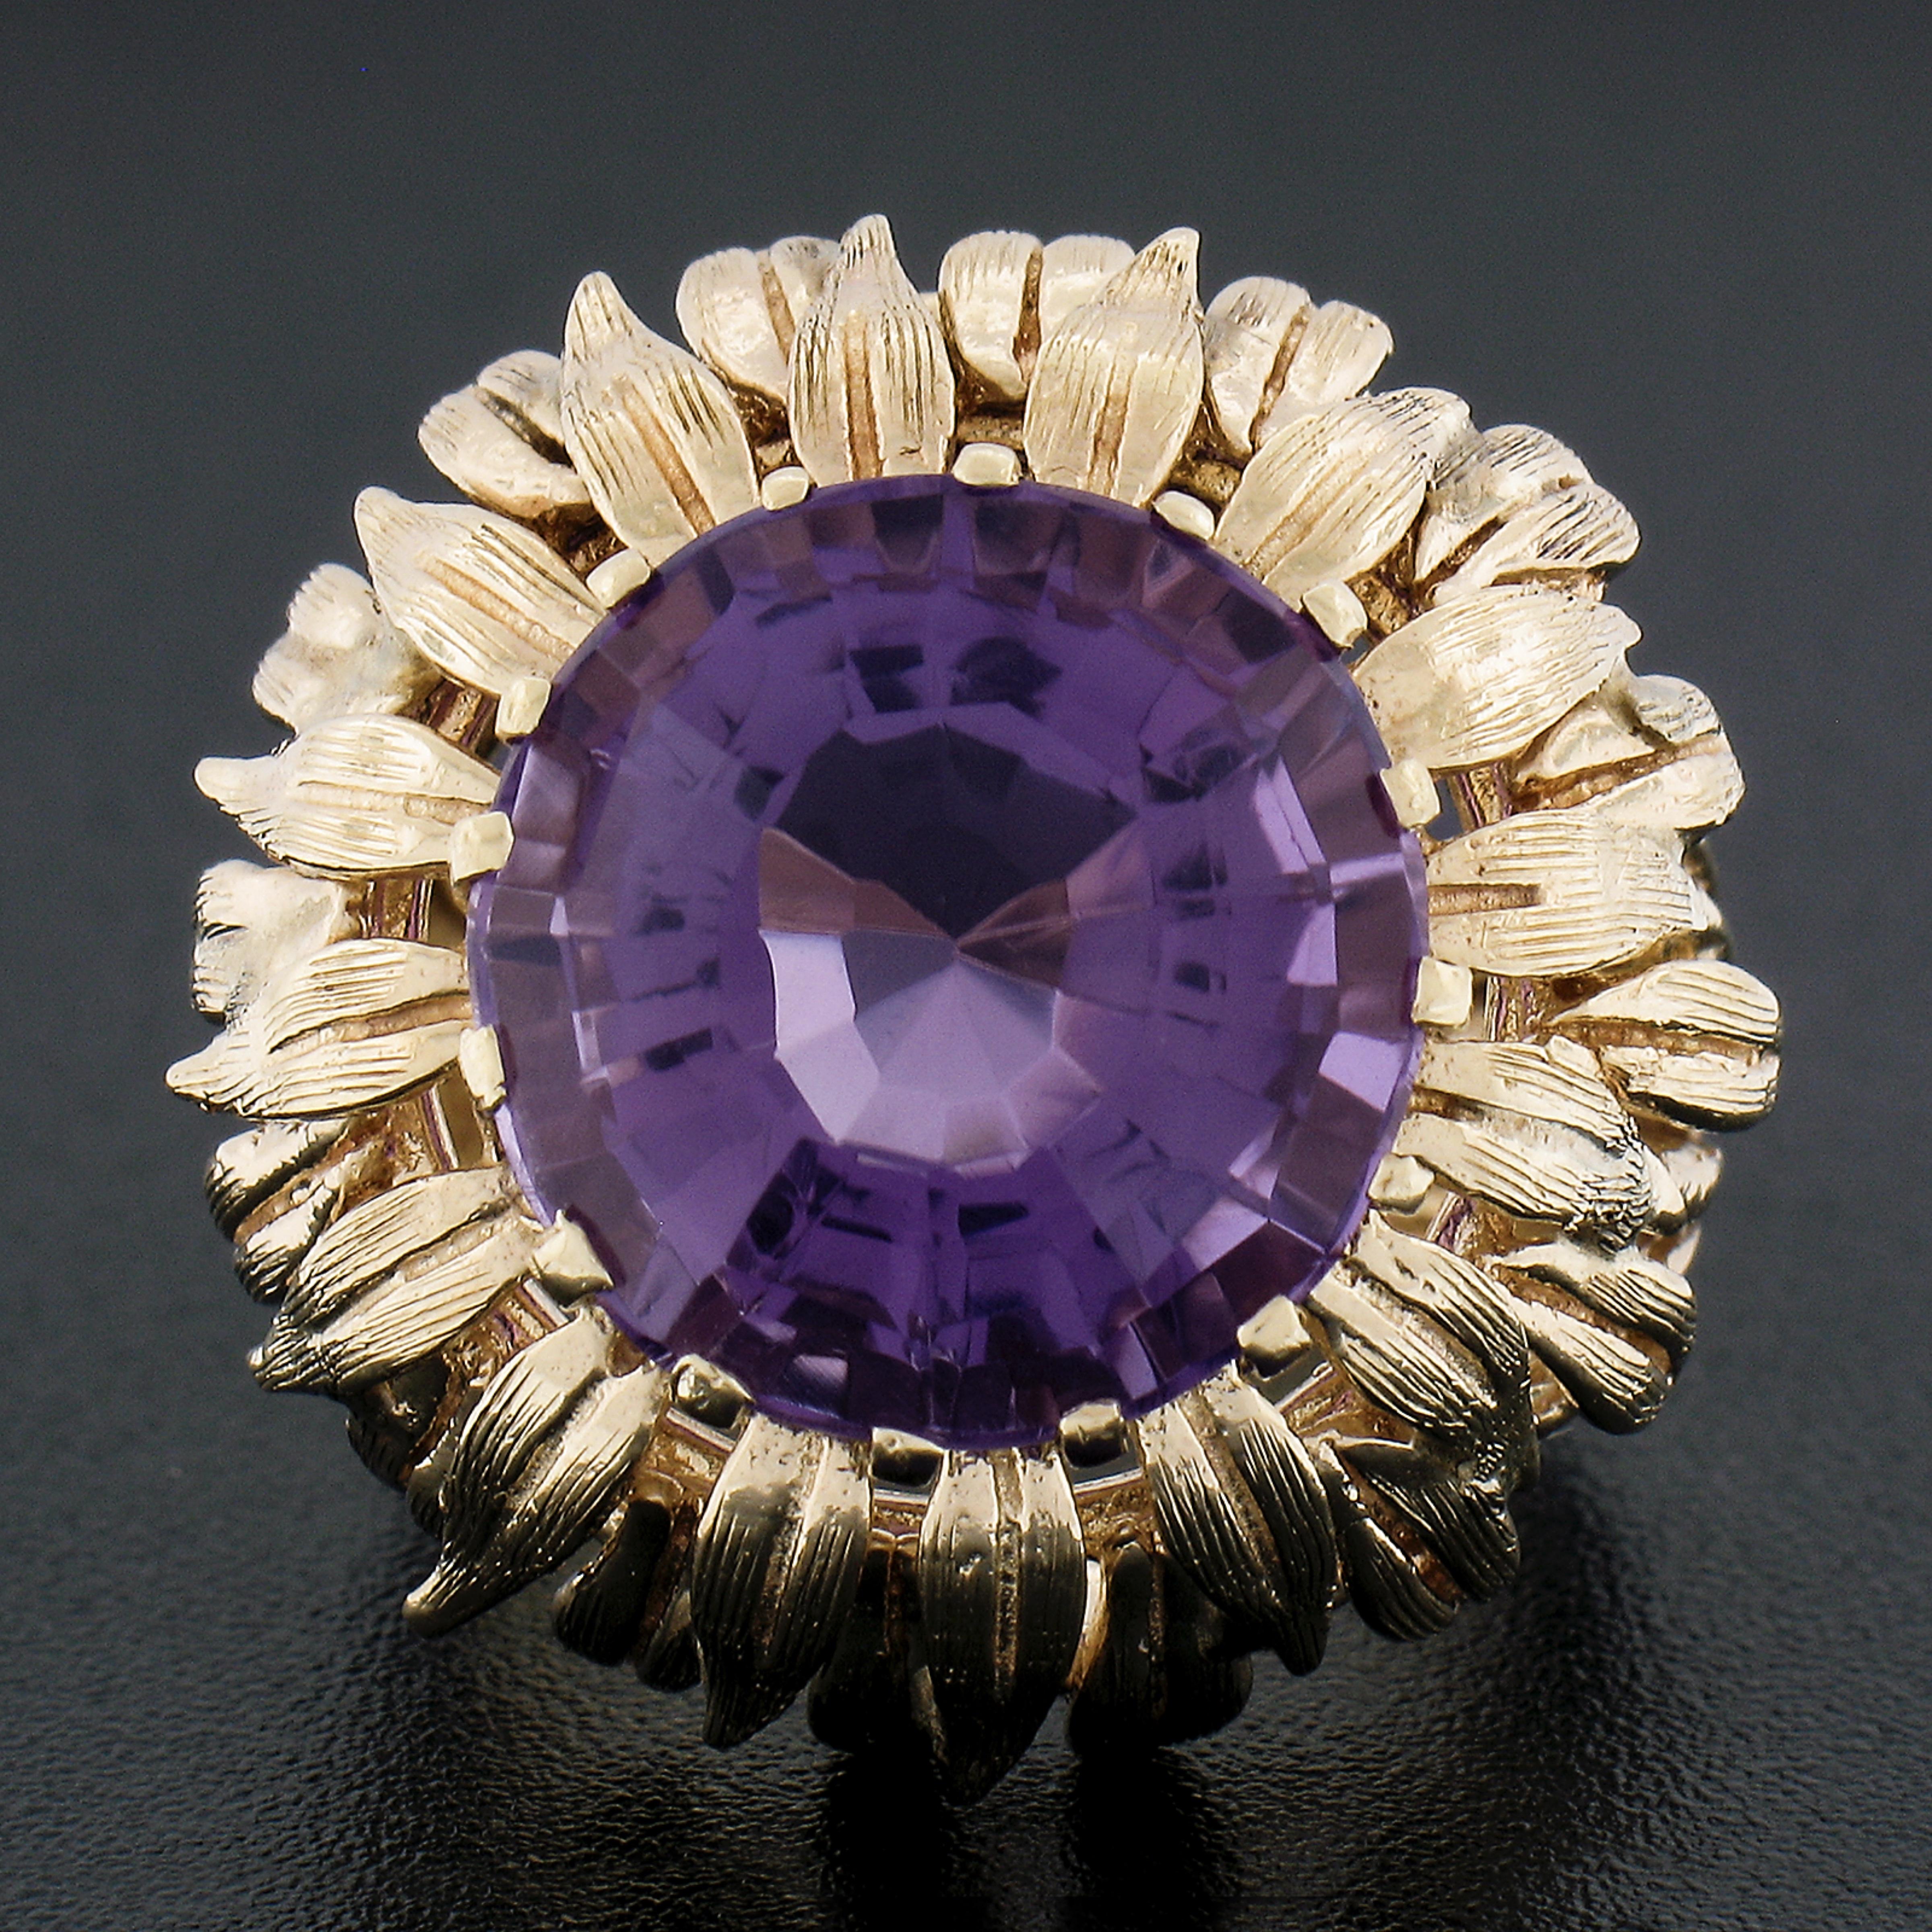 --Stone(s):--
(1) Natural Genuine Amethyst - Round Step Cut - Multi Prong Set - Medium to Dark Purple Color - 13.8mm (approx.)

Material: Solid 14K Yellow Gold
Weight: 13.93 Grams
Ring Size: 7.0 (Fitted on a finger. We can custom size this ring. -